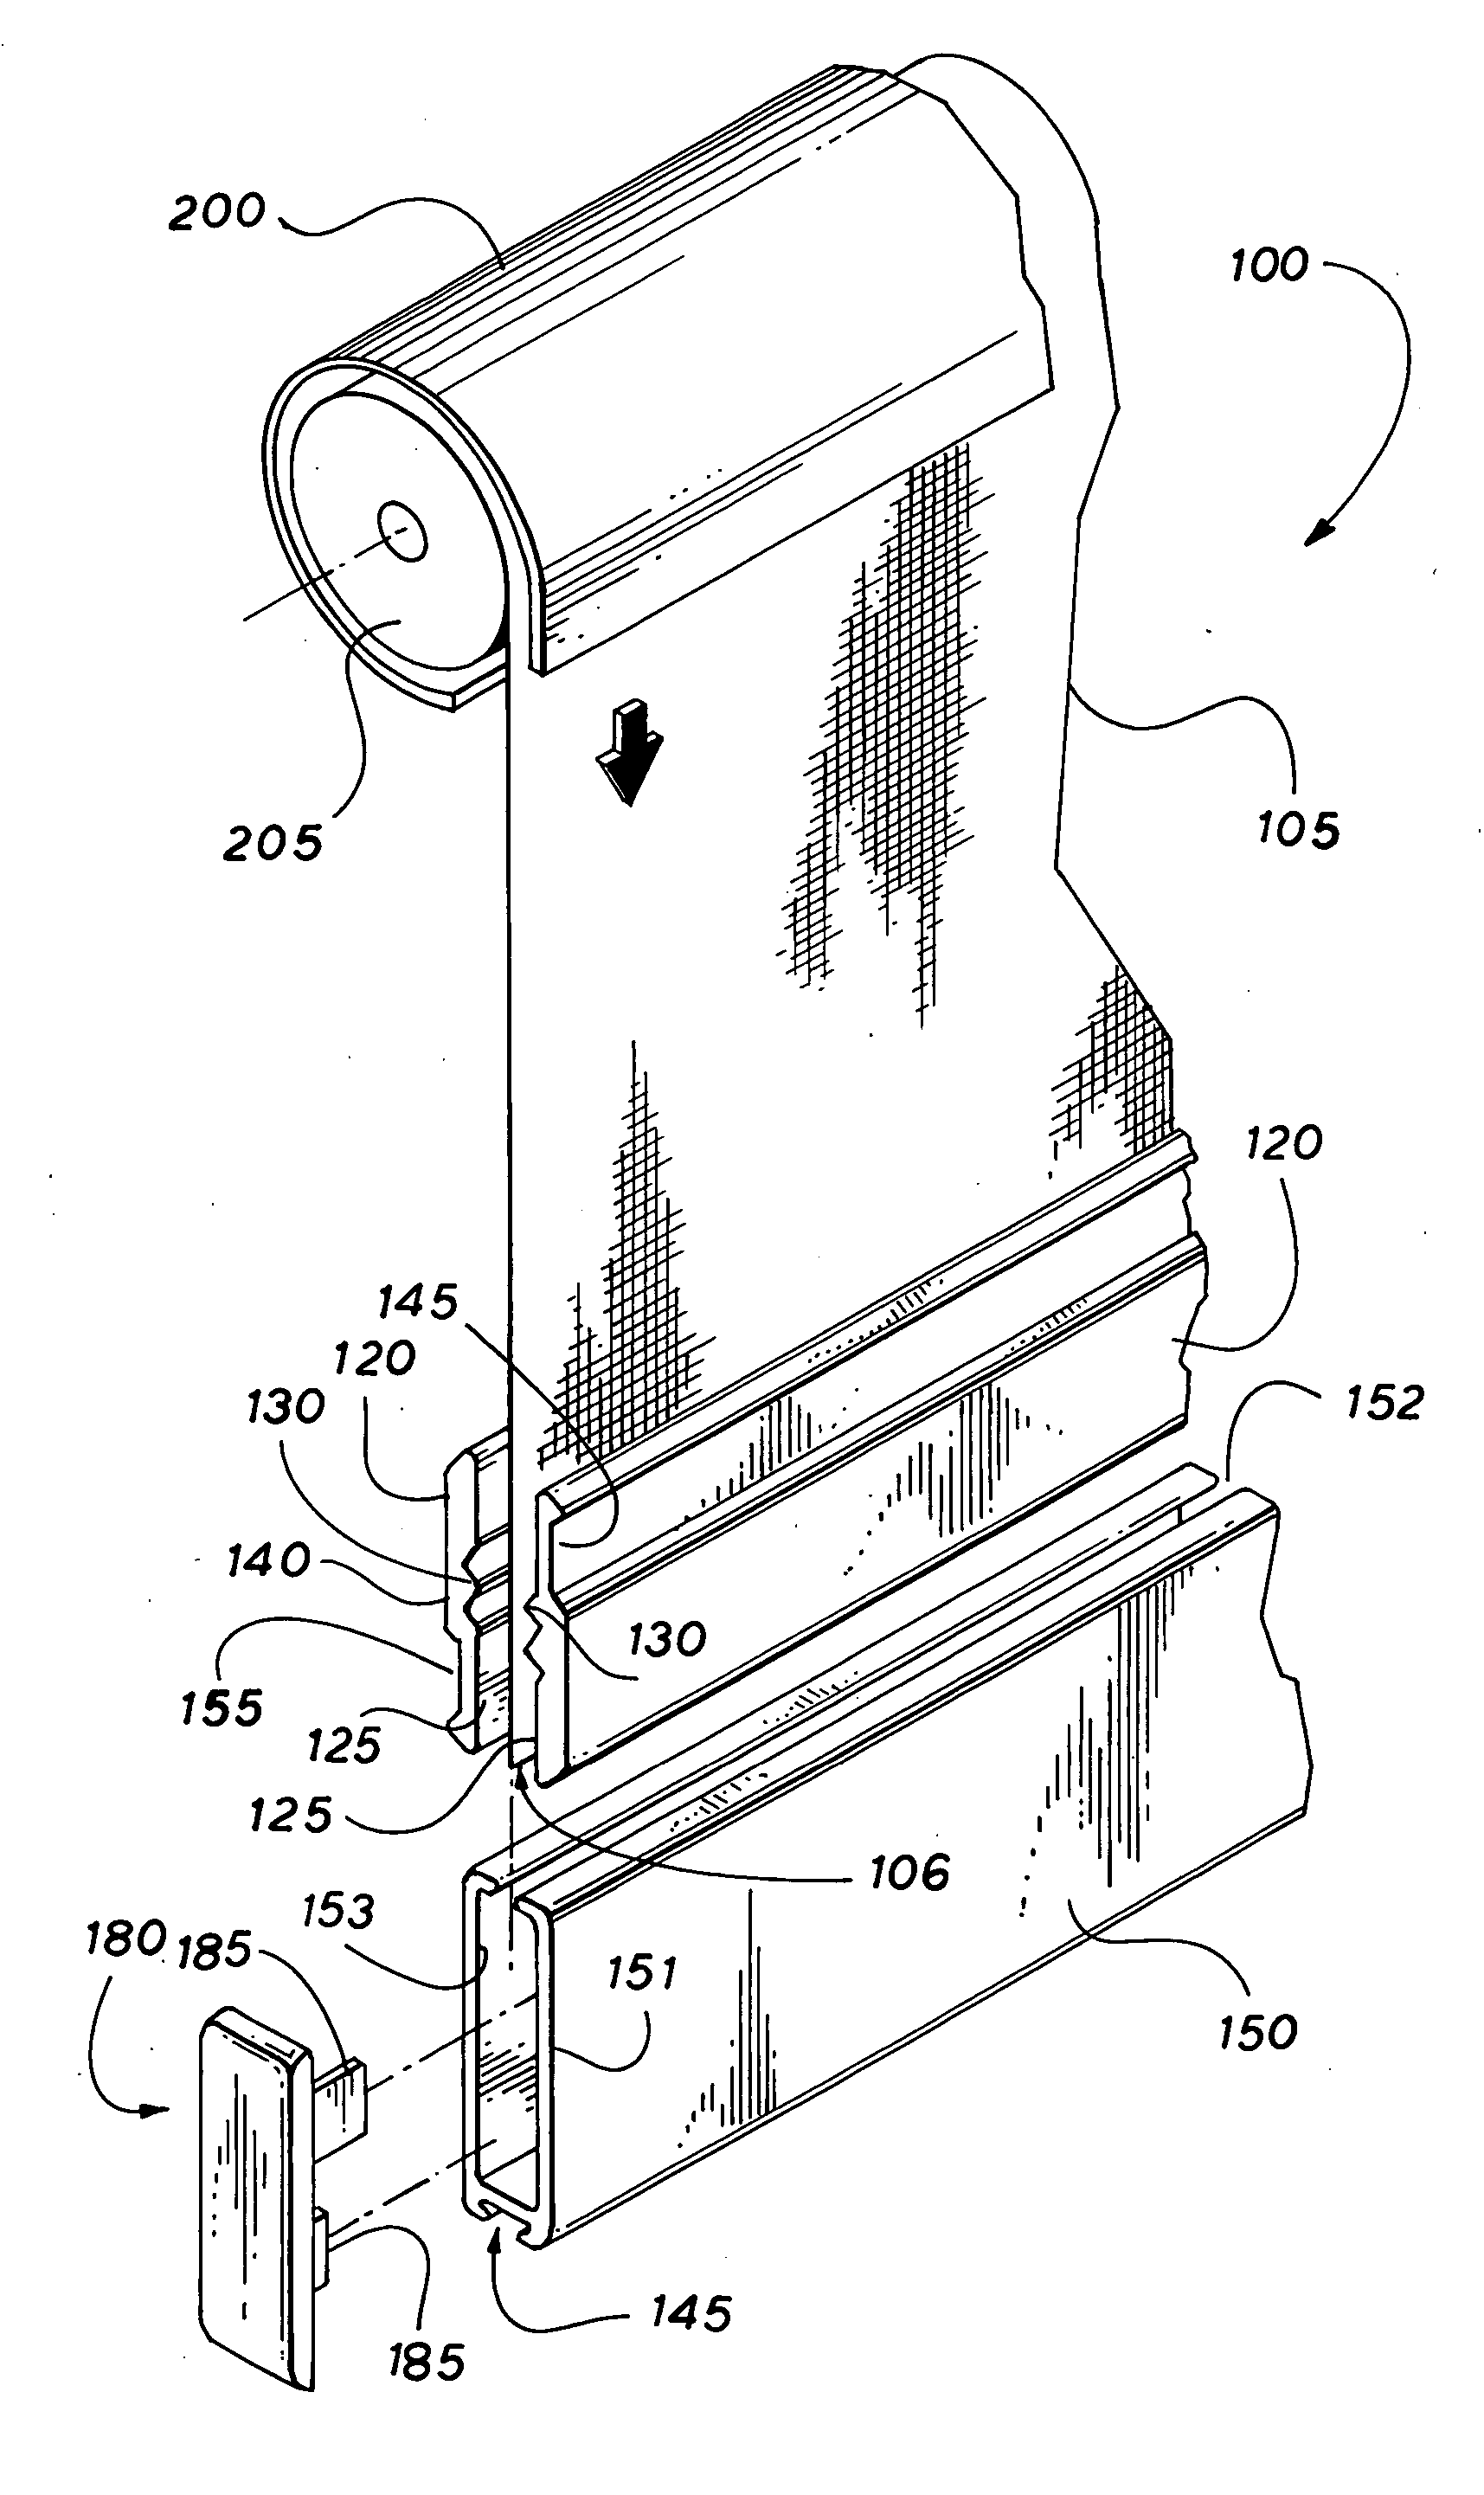 Pull bar screen apparatus and system